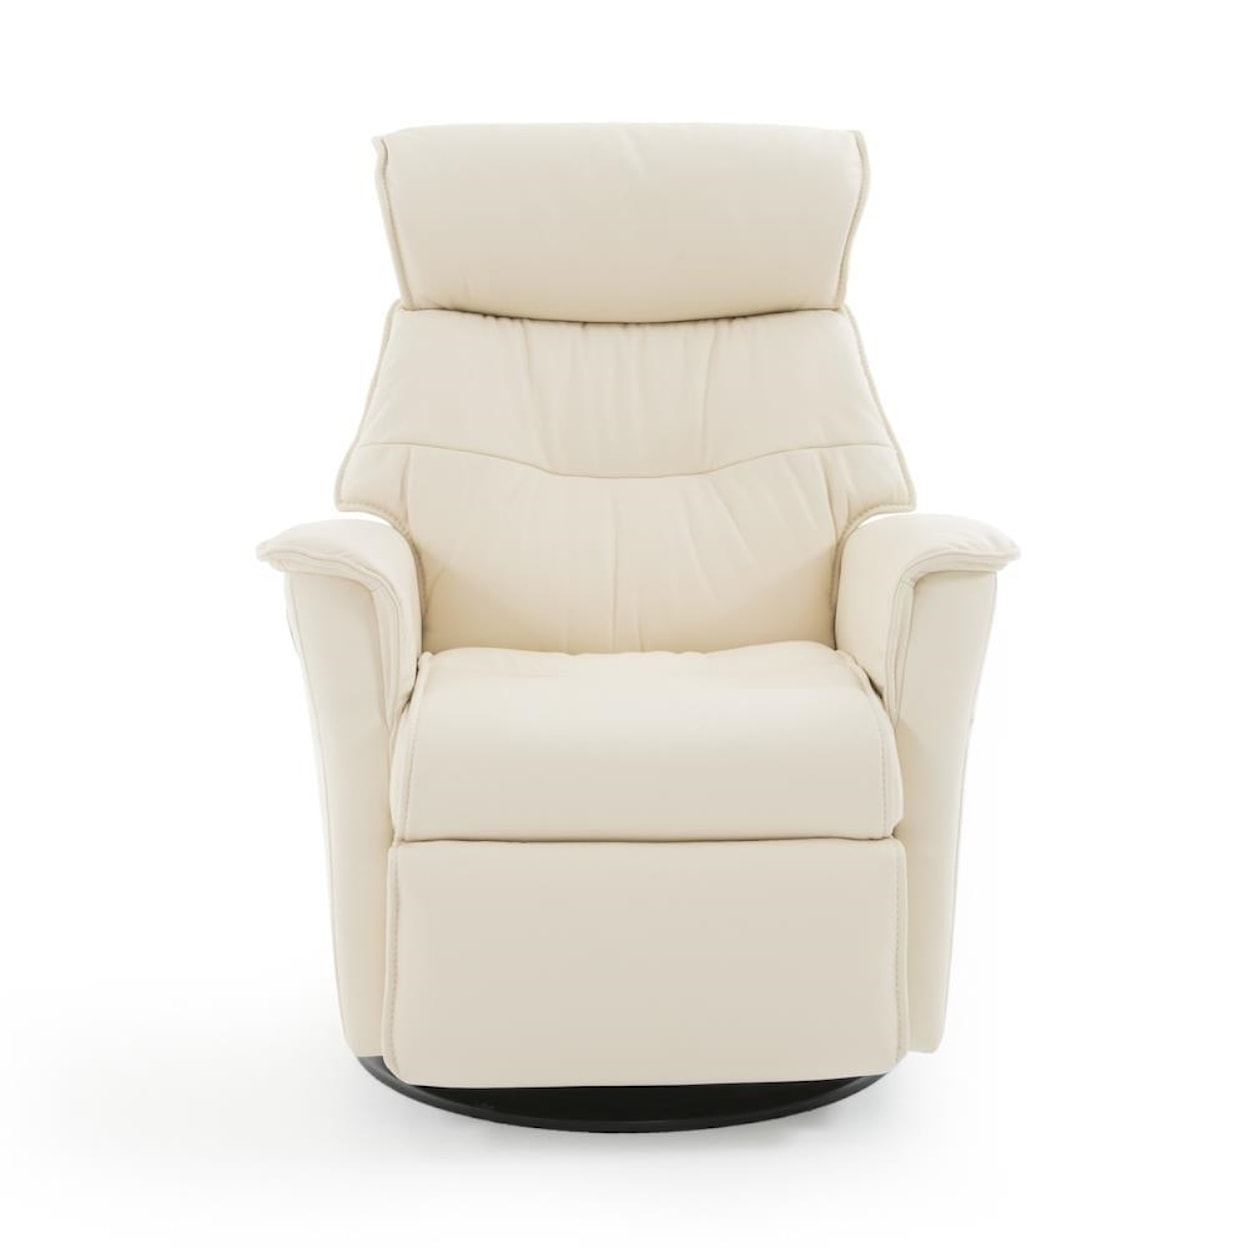 IMG Norway Captain Standard Recliner with Chaise